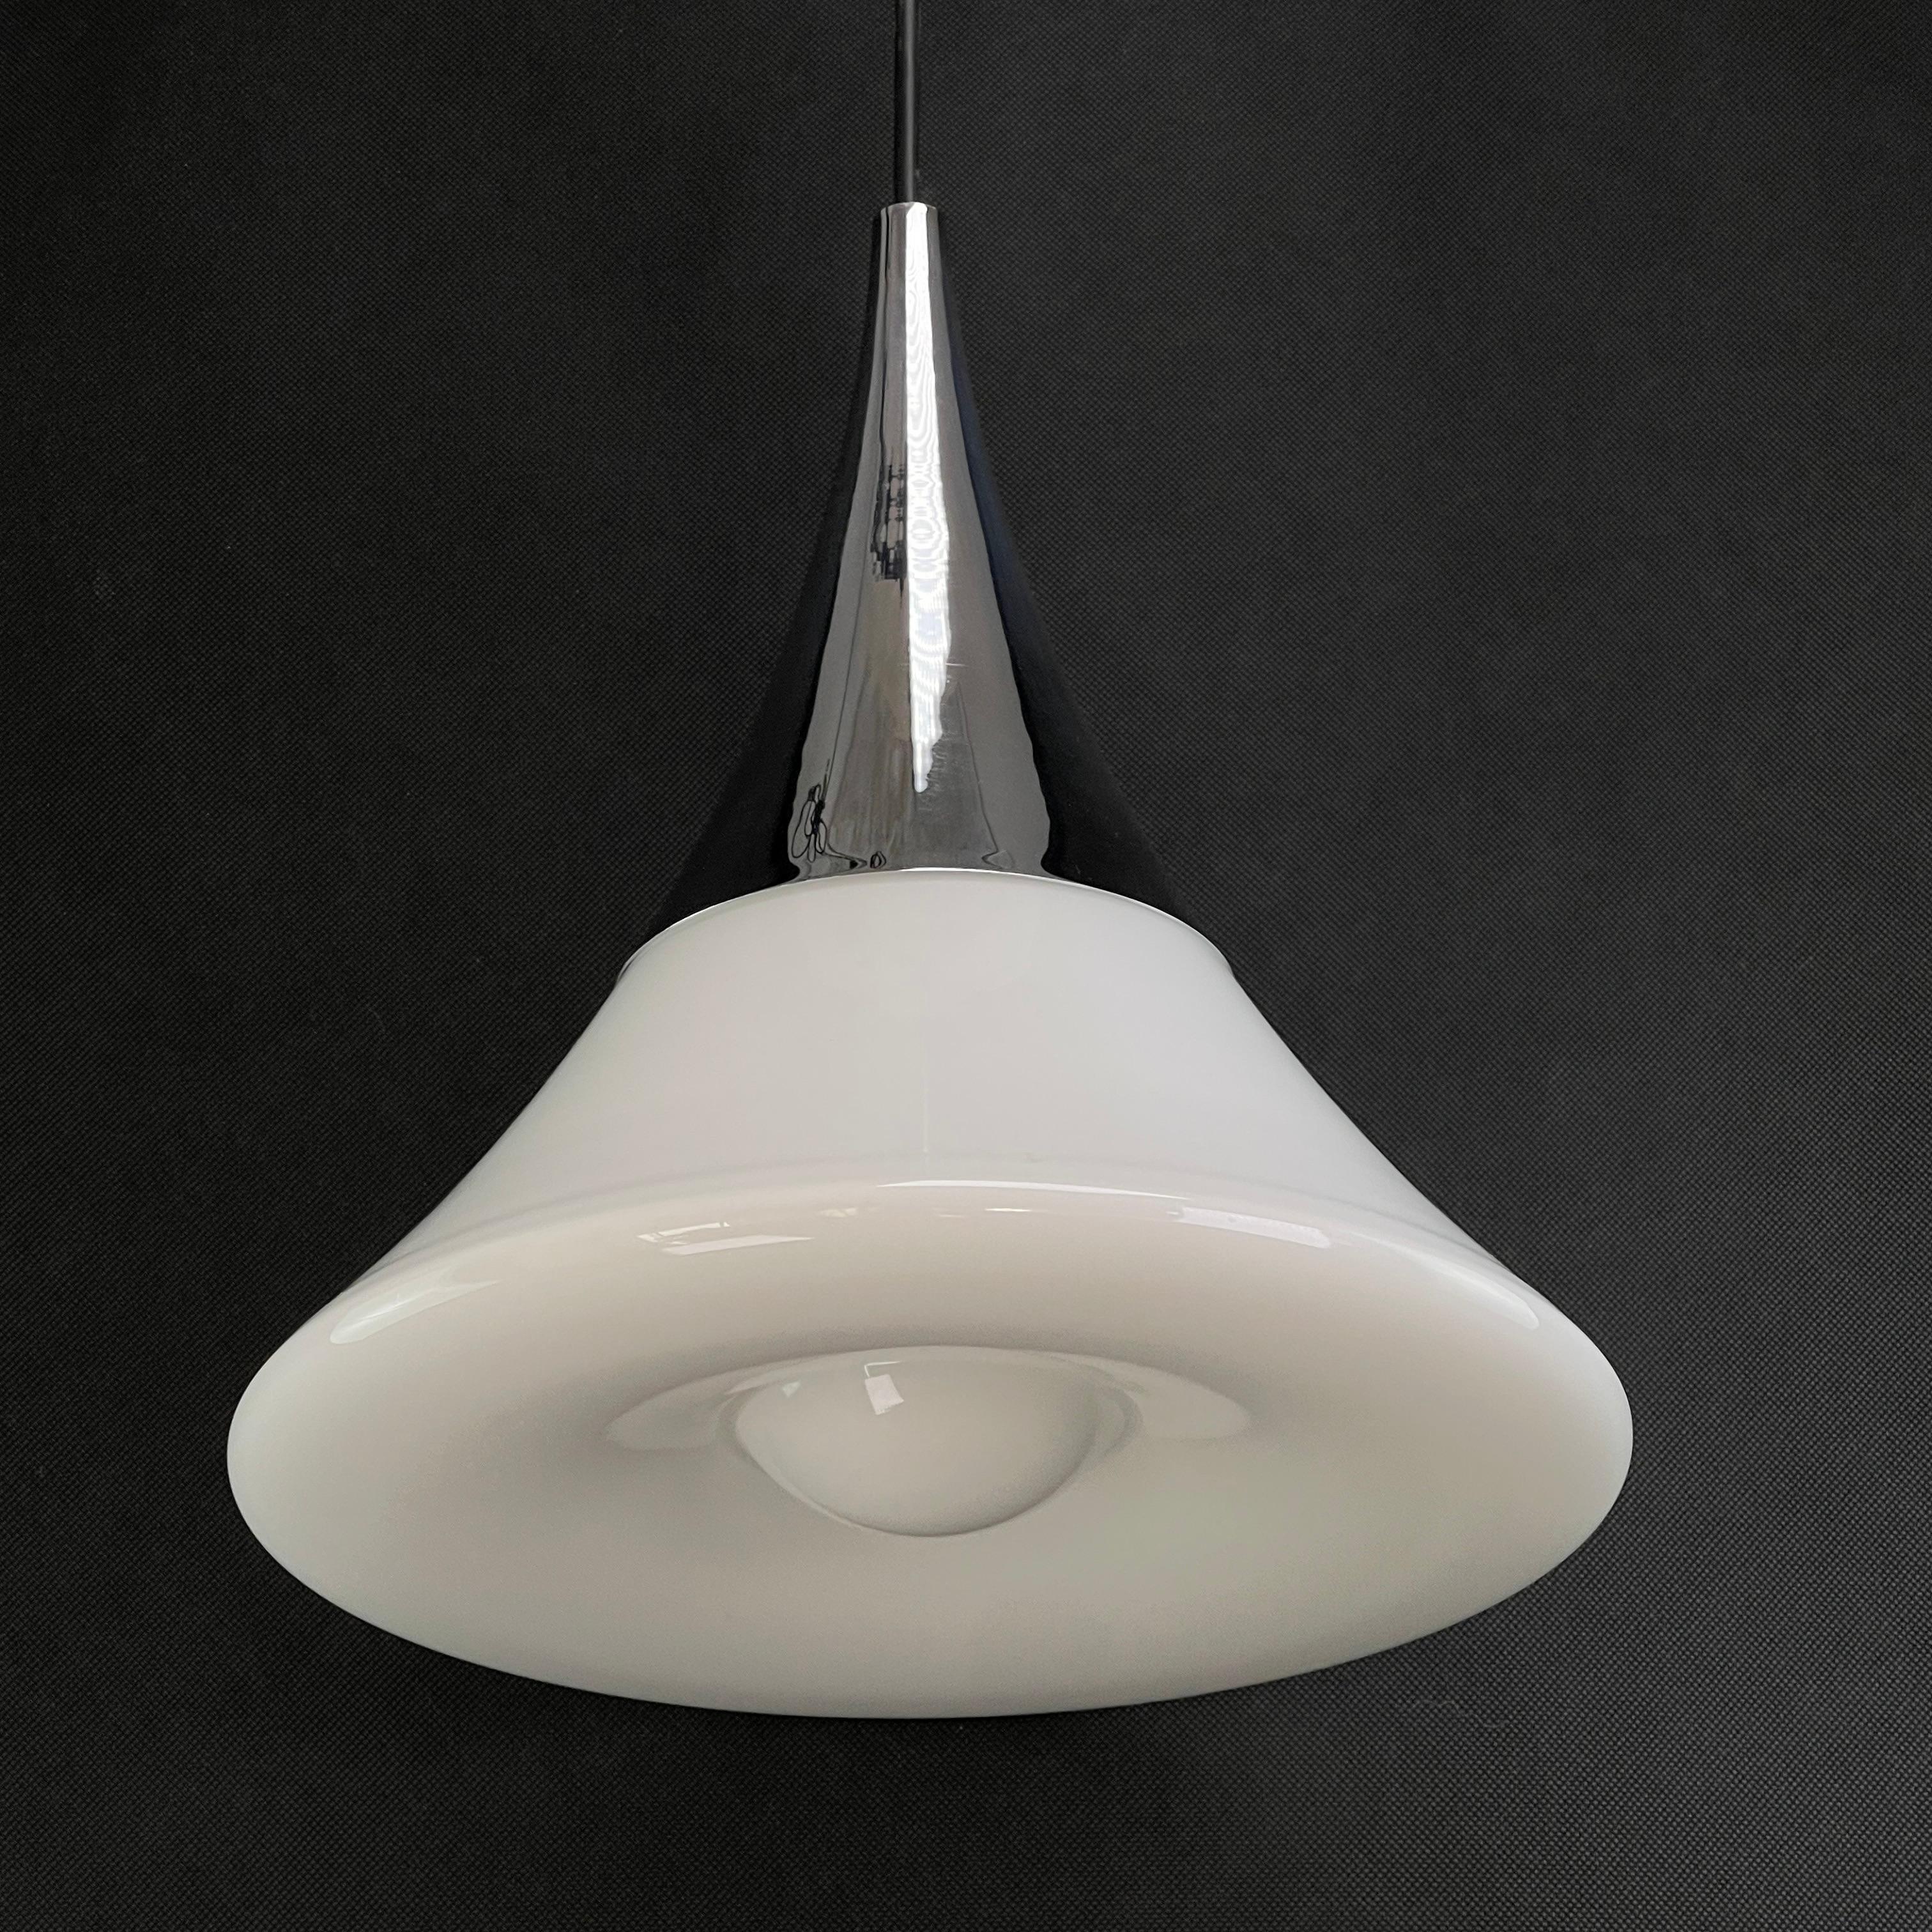 Ceiling lamp from Glashütte Limburg - 1960s.

This white and silver lamp is a true design classic from the 1960s. 
This vintage lamp is an original and gives a pleasant light. It has one burning point.

The cleaned item has 1 x E27 socket. The